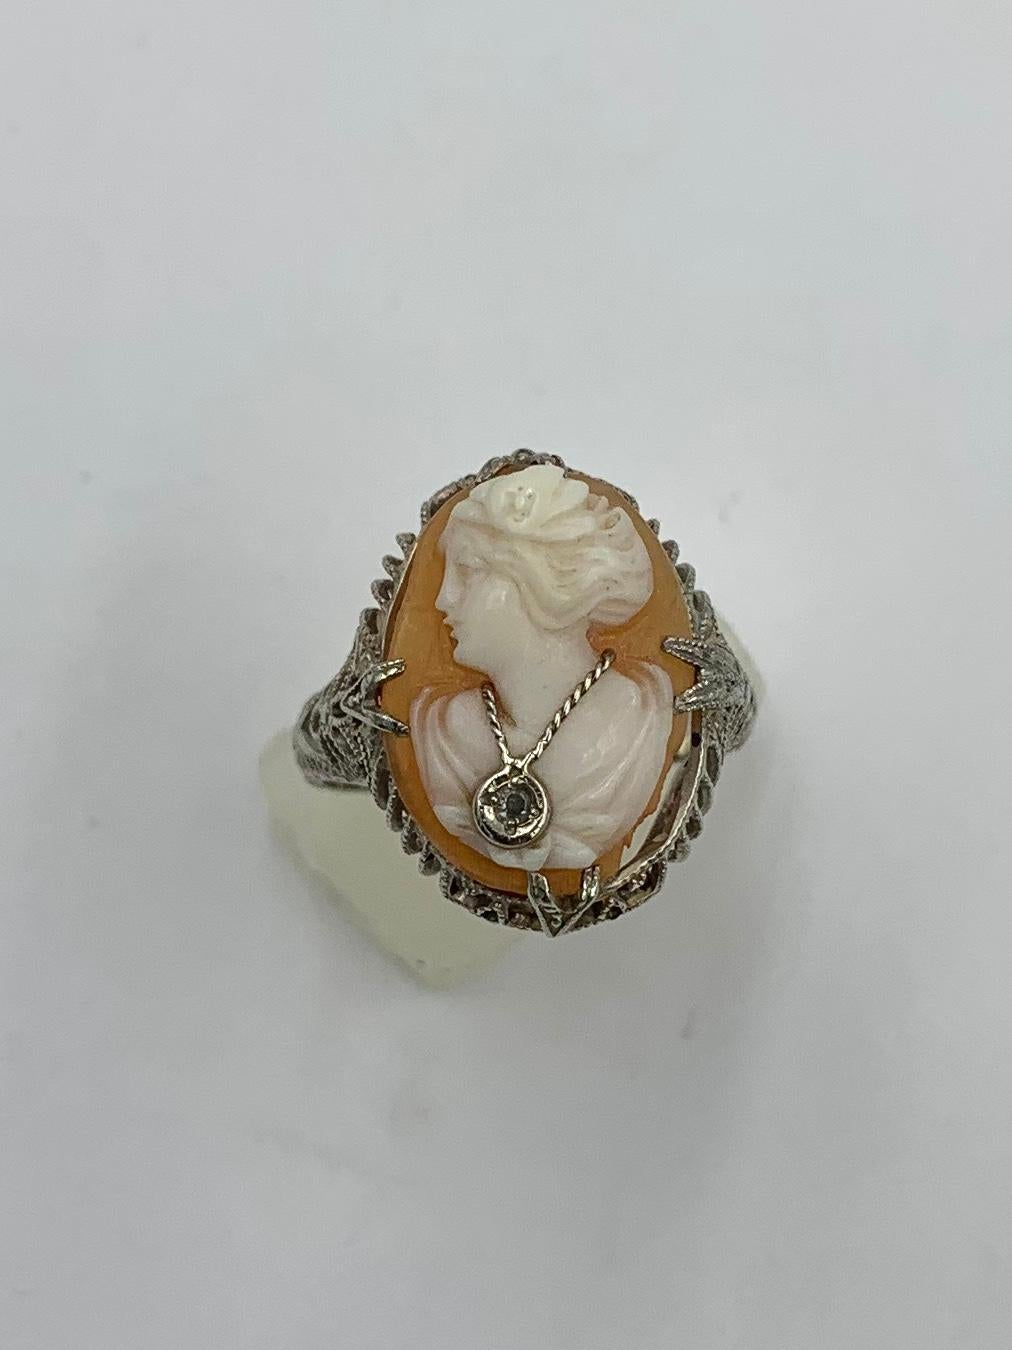 A SUPERB VICTORIAN - BELLE EPOQUE CARVED SHELL CAMEO DIAMOND HABILLE RING WITH A GORGEOUS FACE AND ABSOLUTELY MAGNIFICENT DETAIL AND ARTISANSHIP IN A BEAUTIFUL AND ELEGANT 14 KARAT WHITE GOLD FILIGREE SETTING.  She is wearing a beautiful diamond